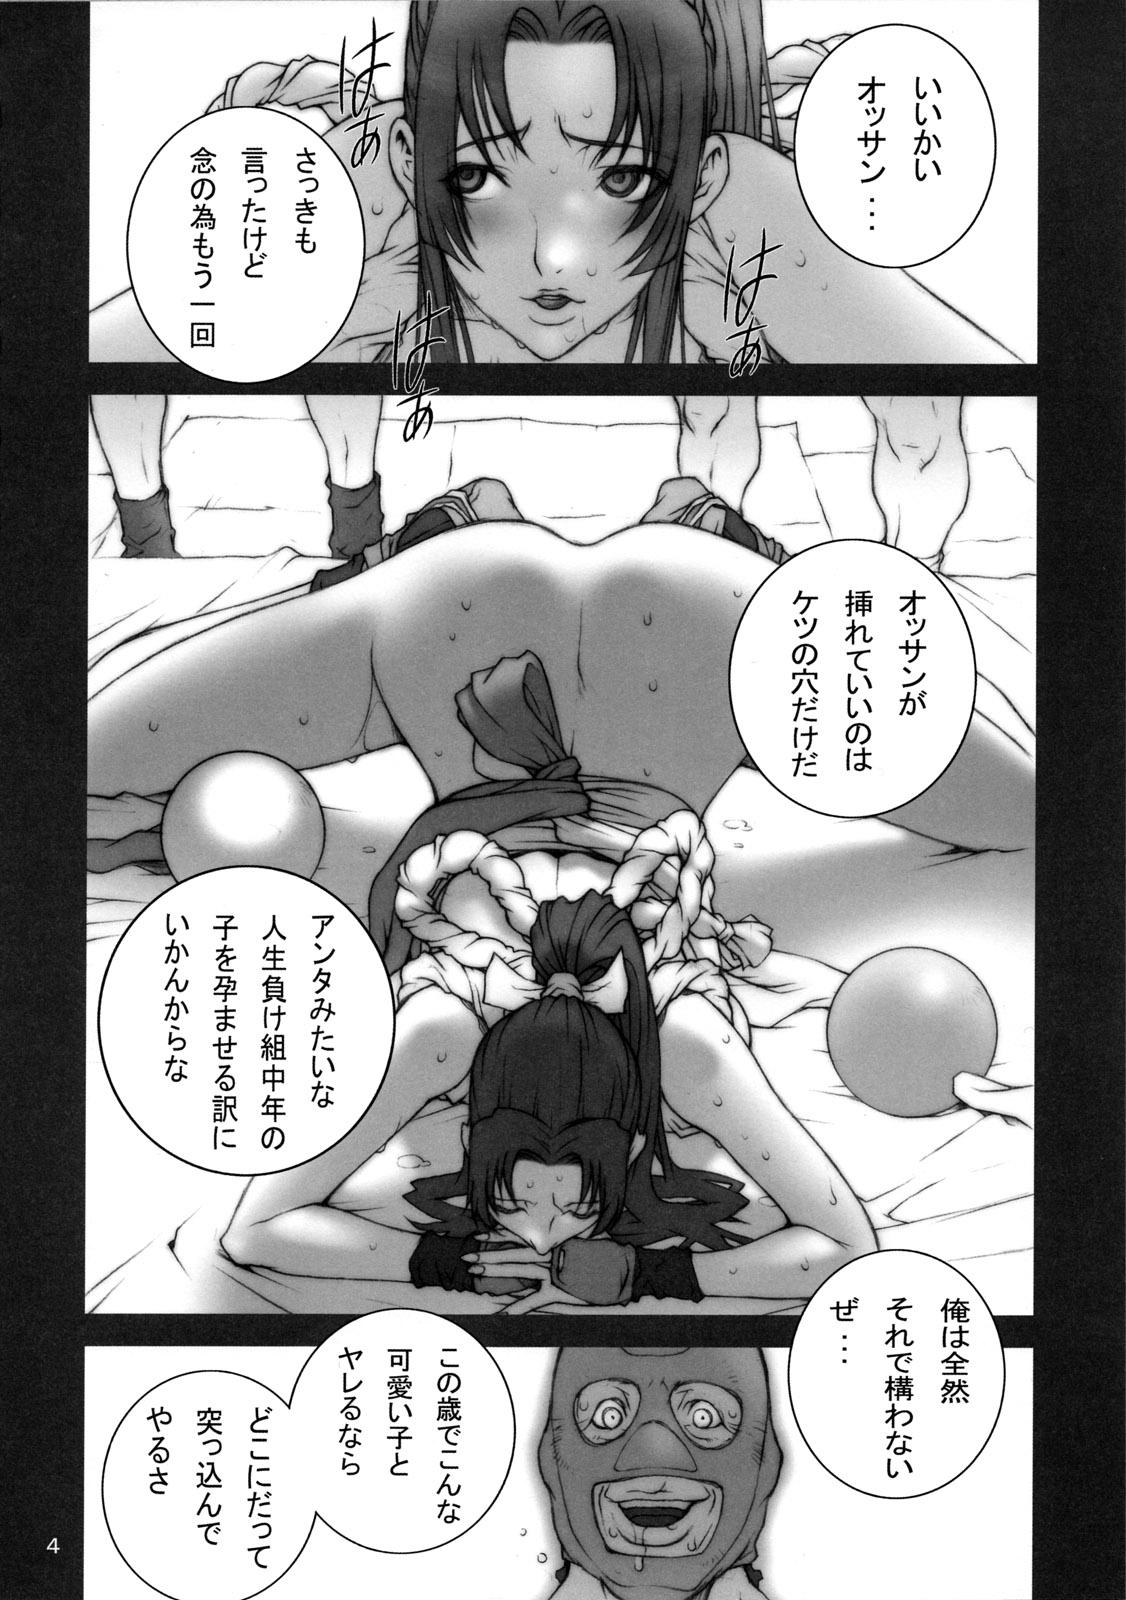 Rough Porn Tou San - King of fighters Fake Tits - Page 6